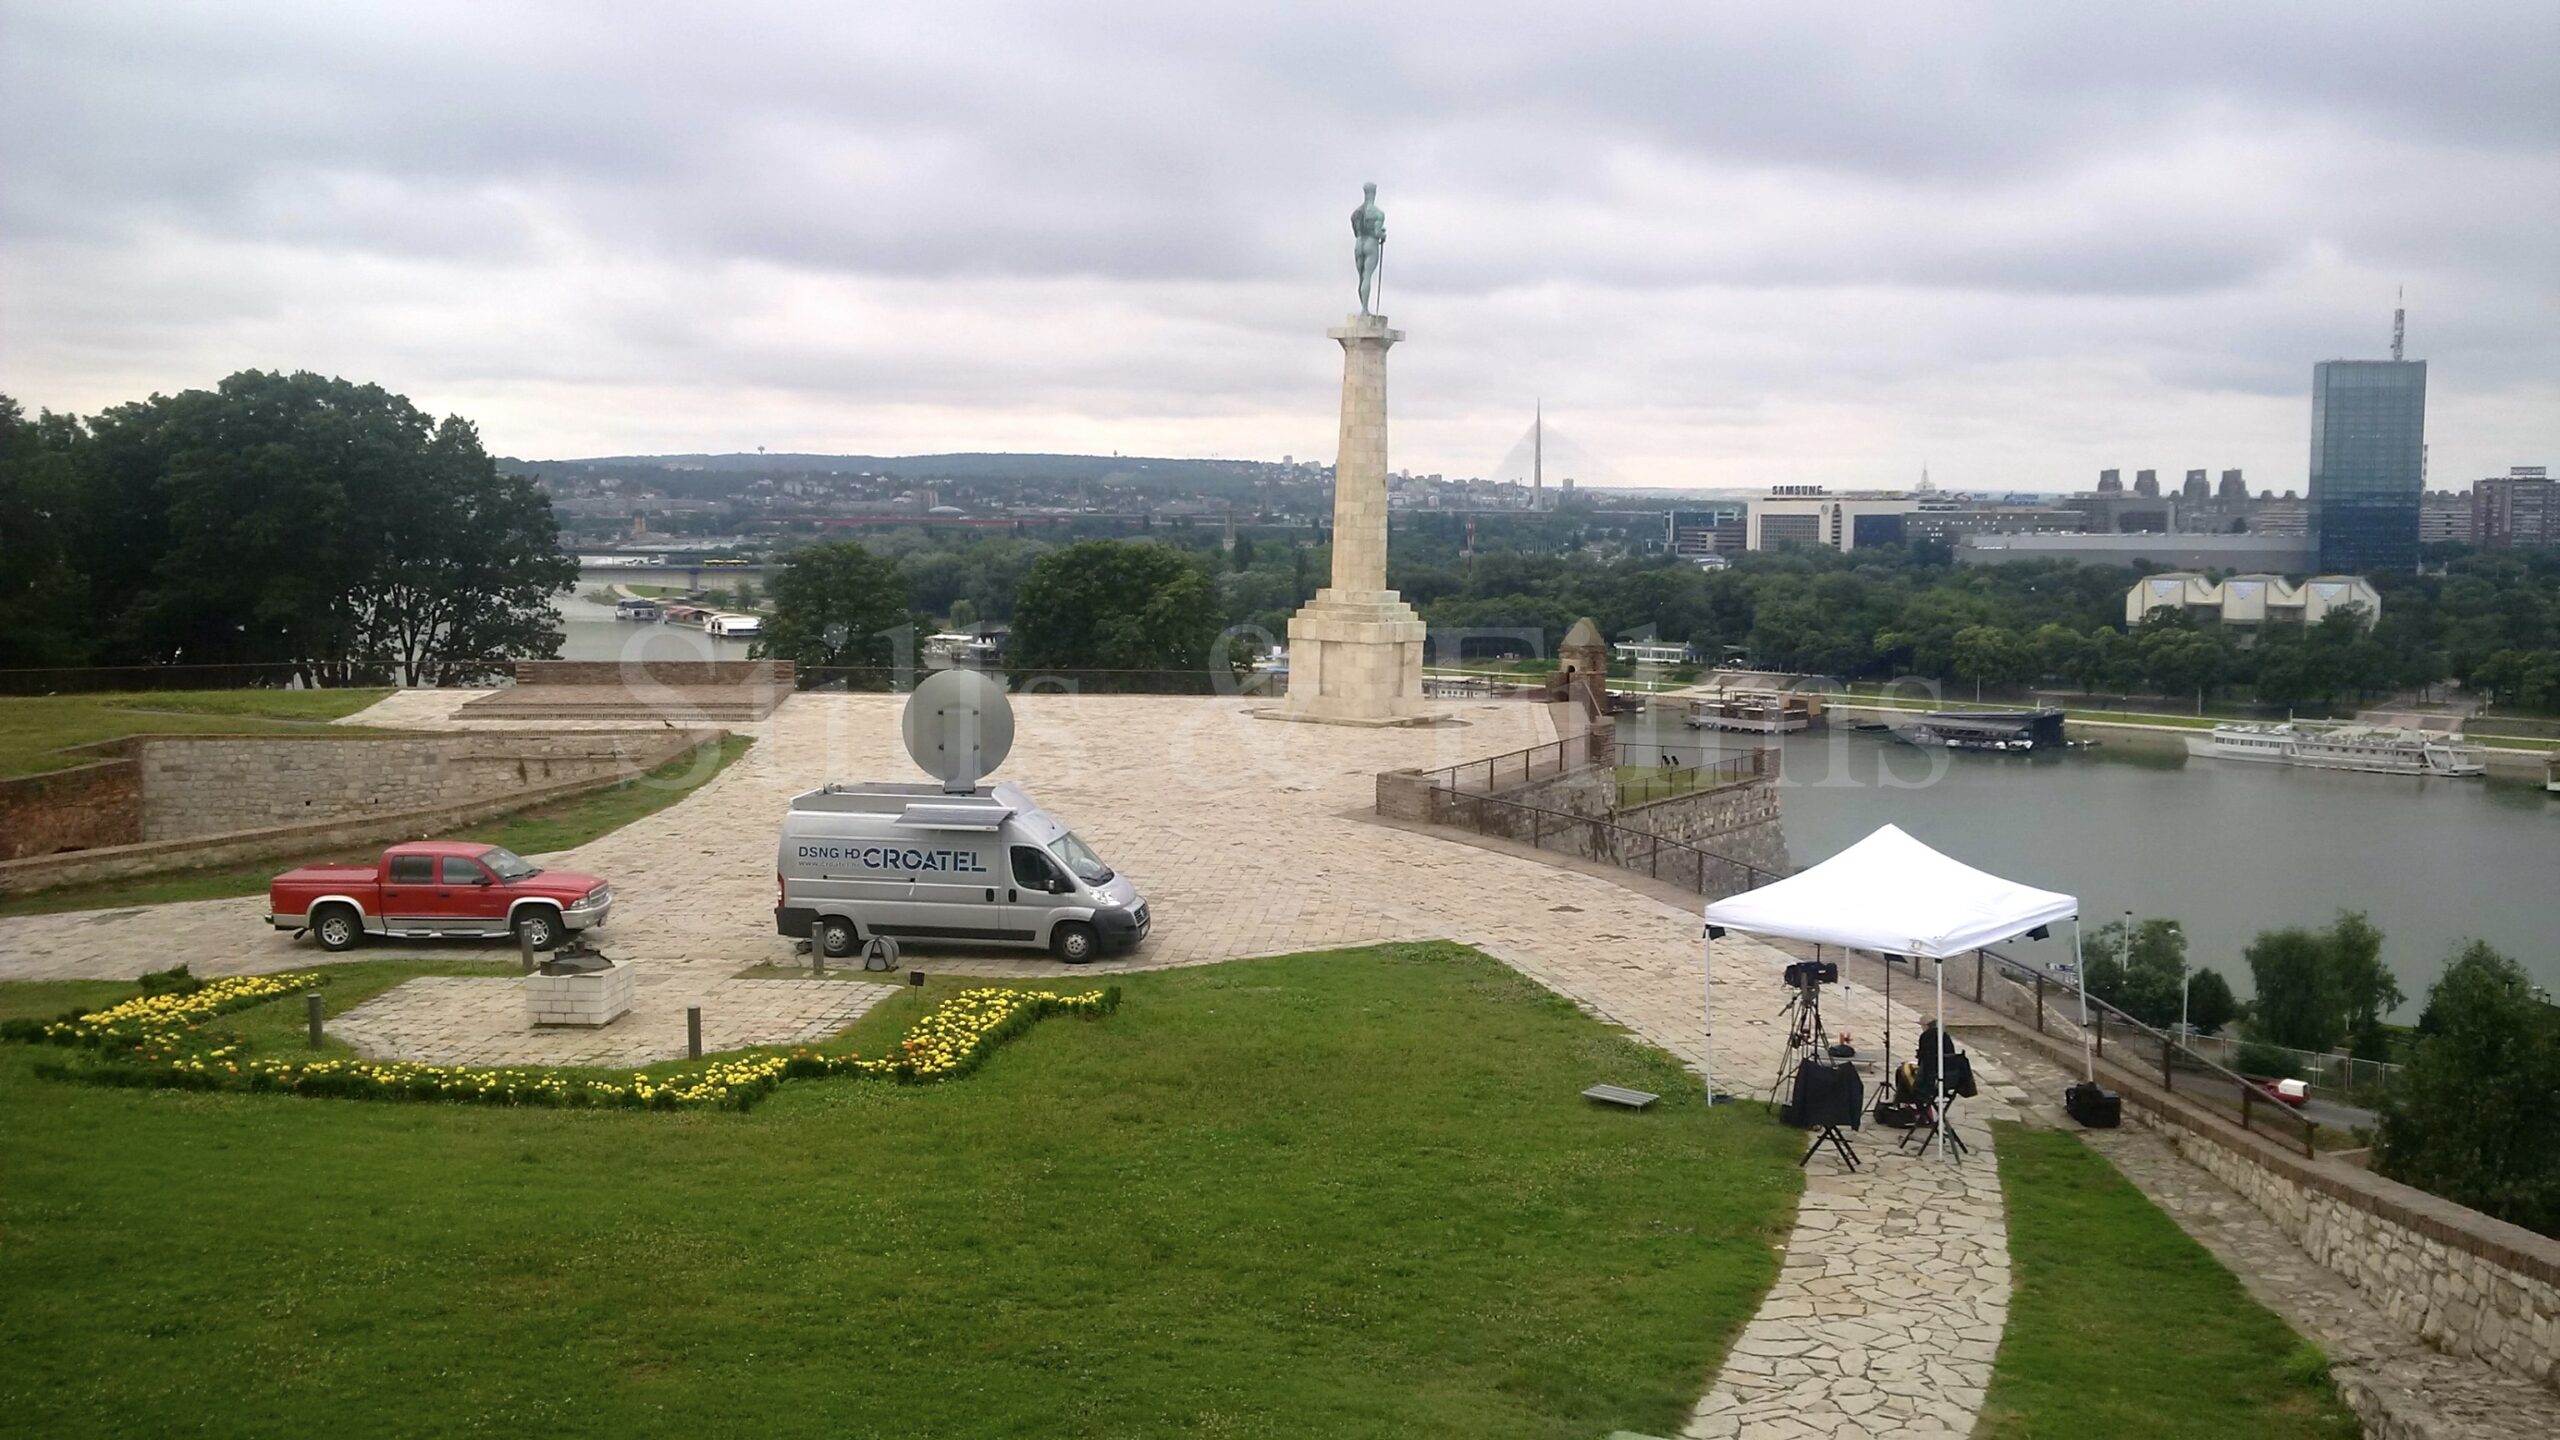 This is our live position for CNBC in the Belgrade fortress